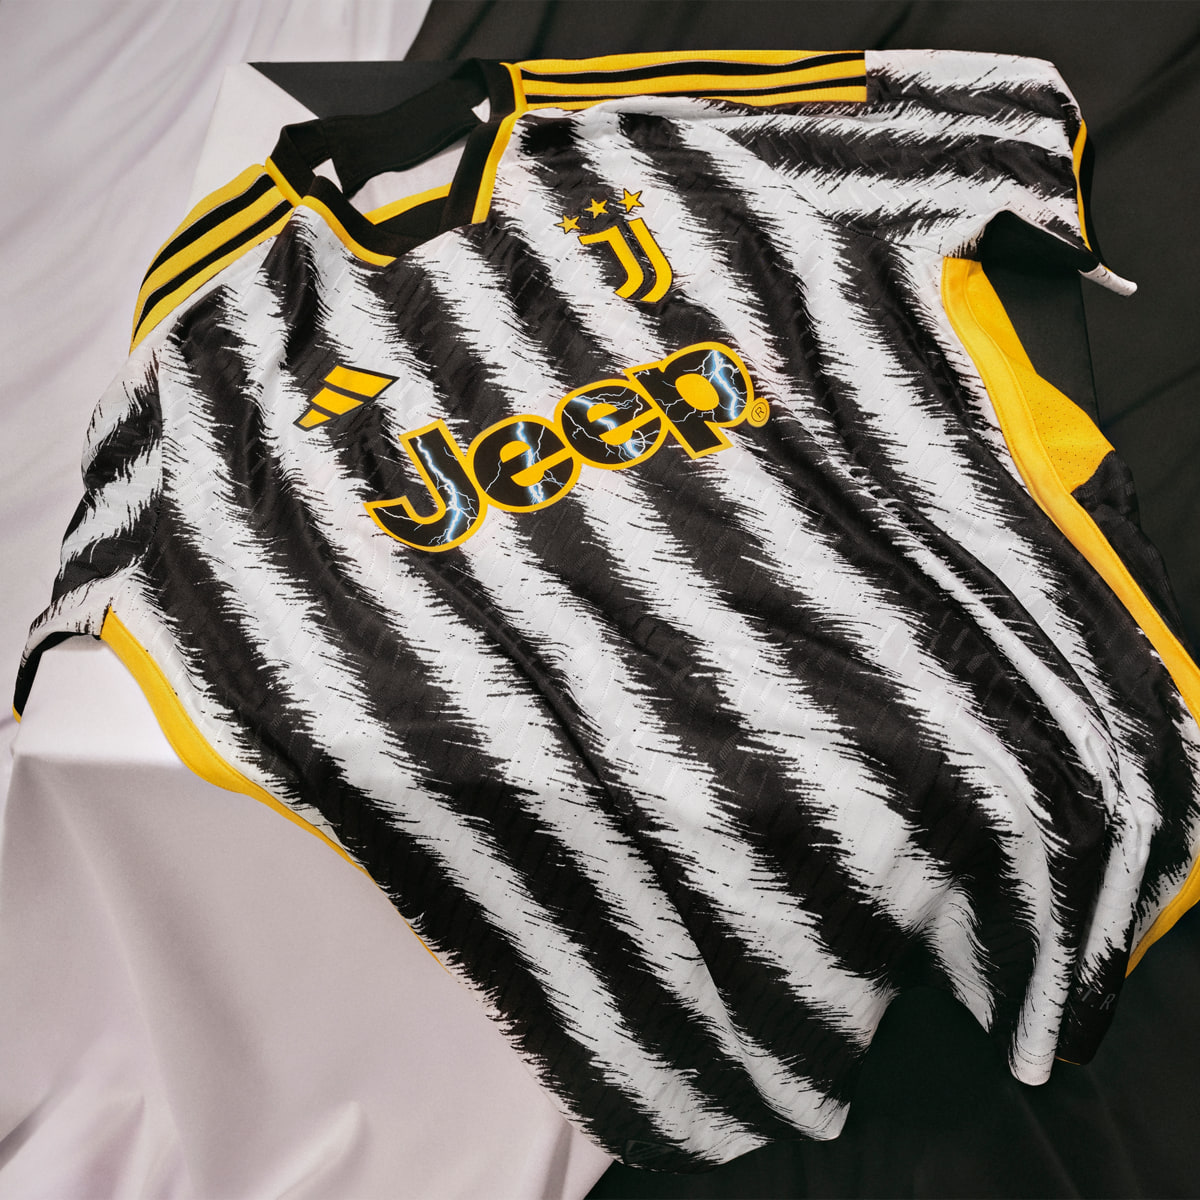 Adidas Juventus 23/24 Home Authentic Jersey. 15